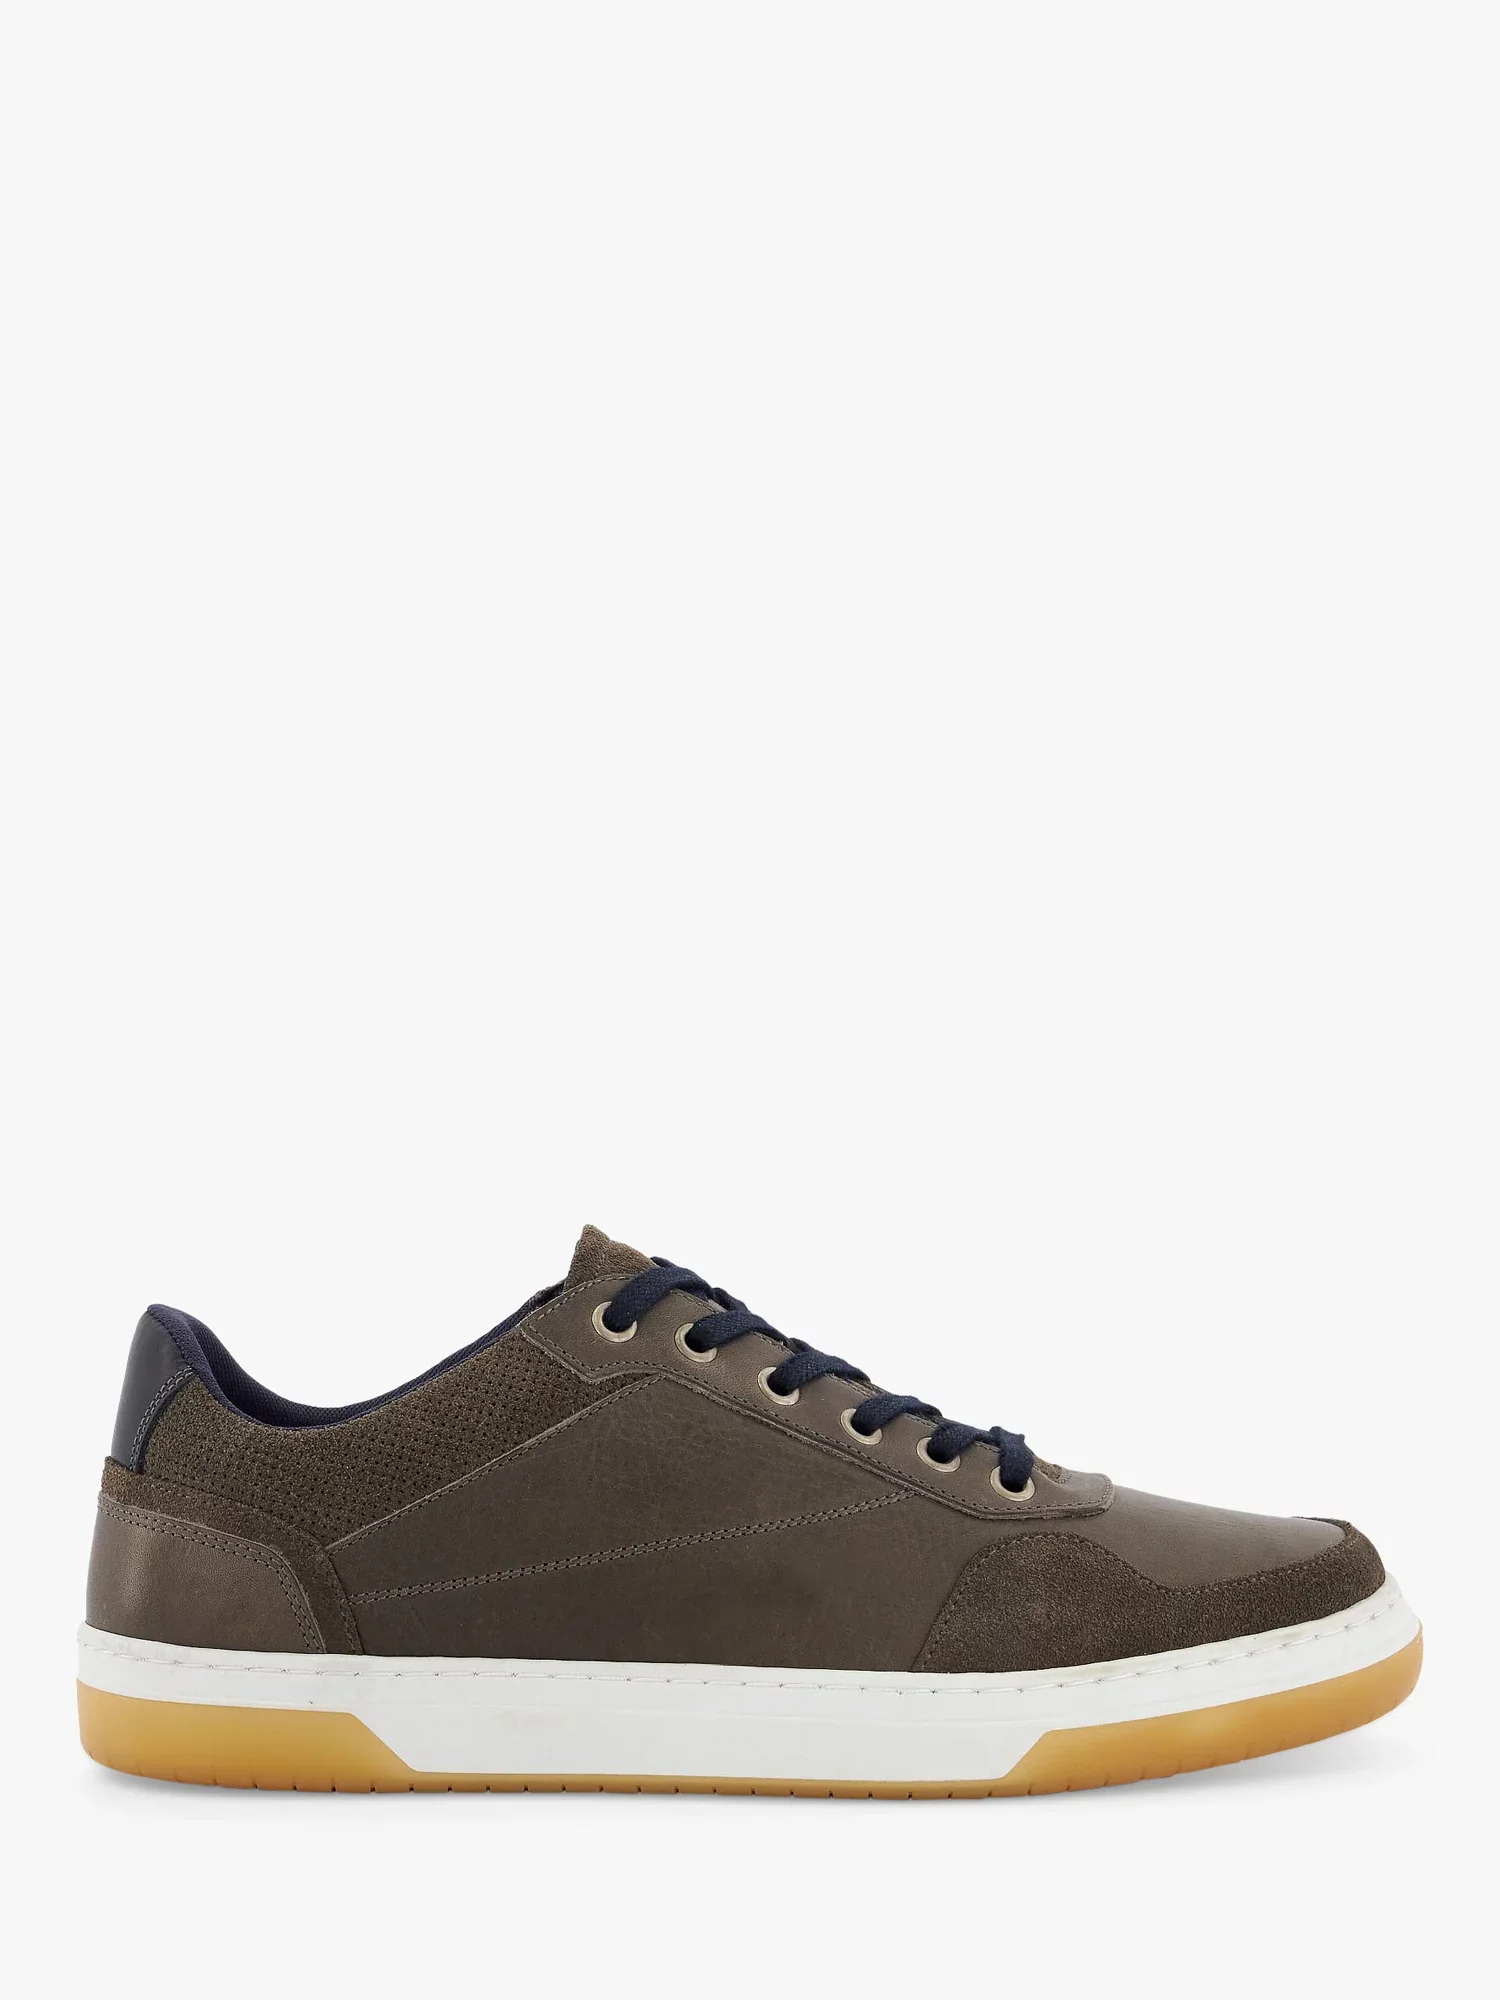 DUNE Thorin Leather Lace Up Trainers in Navy | Endource